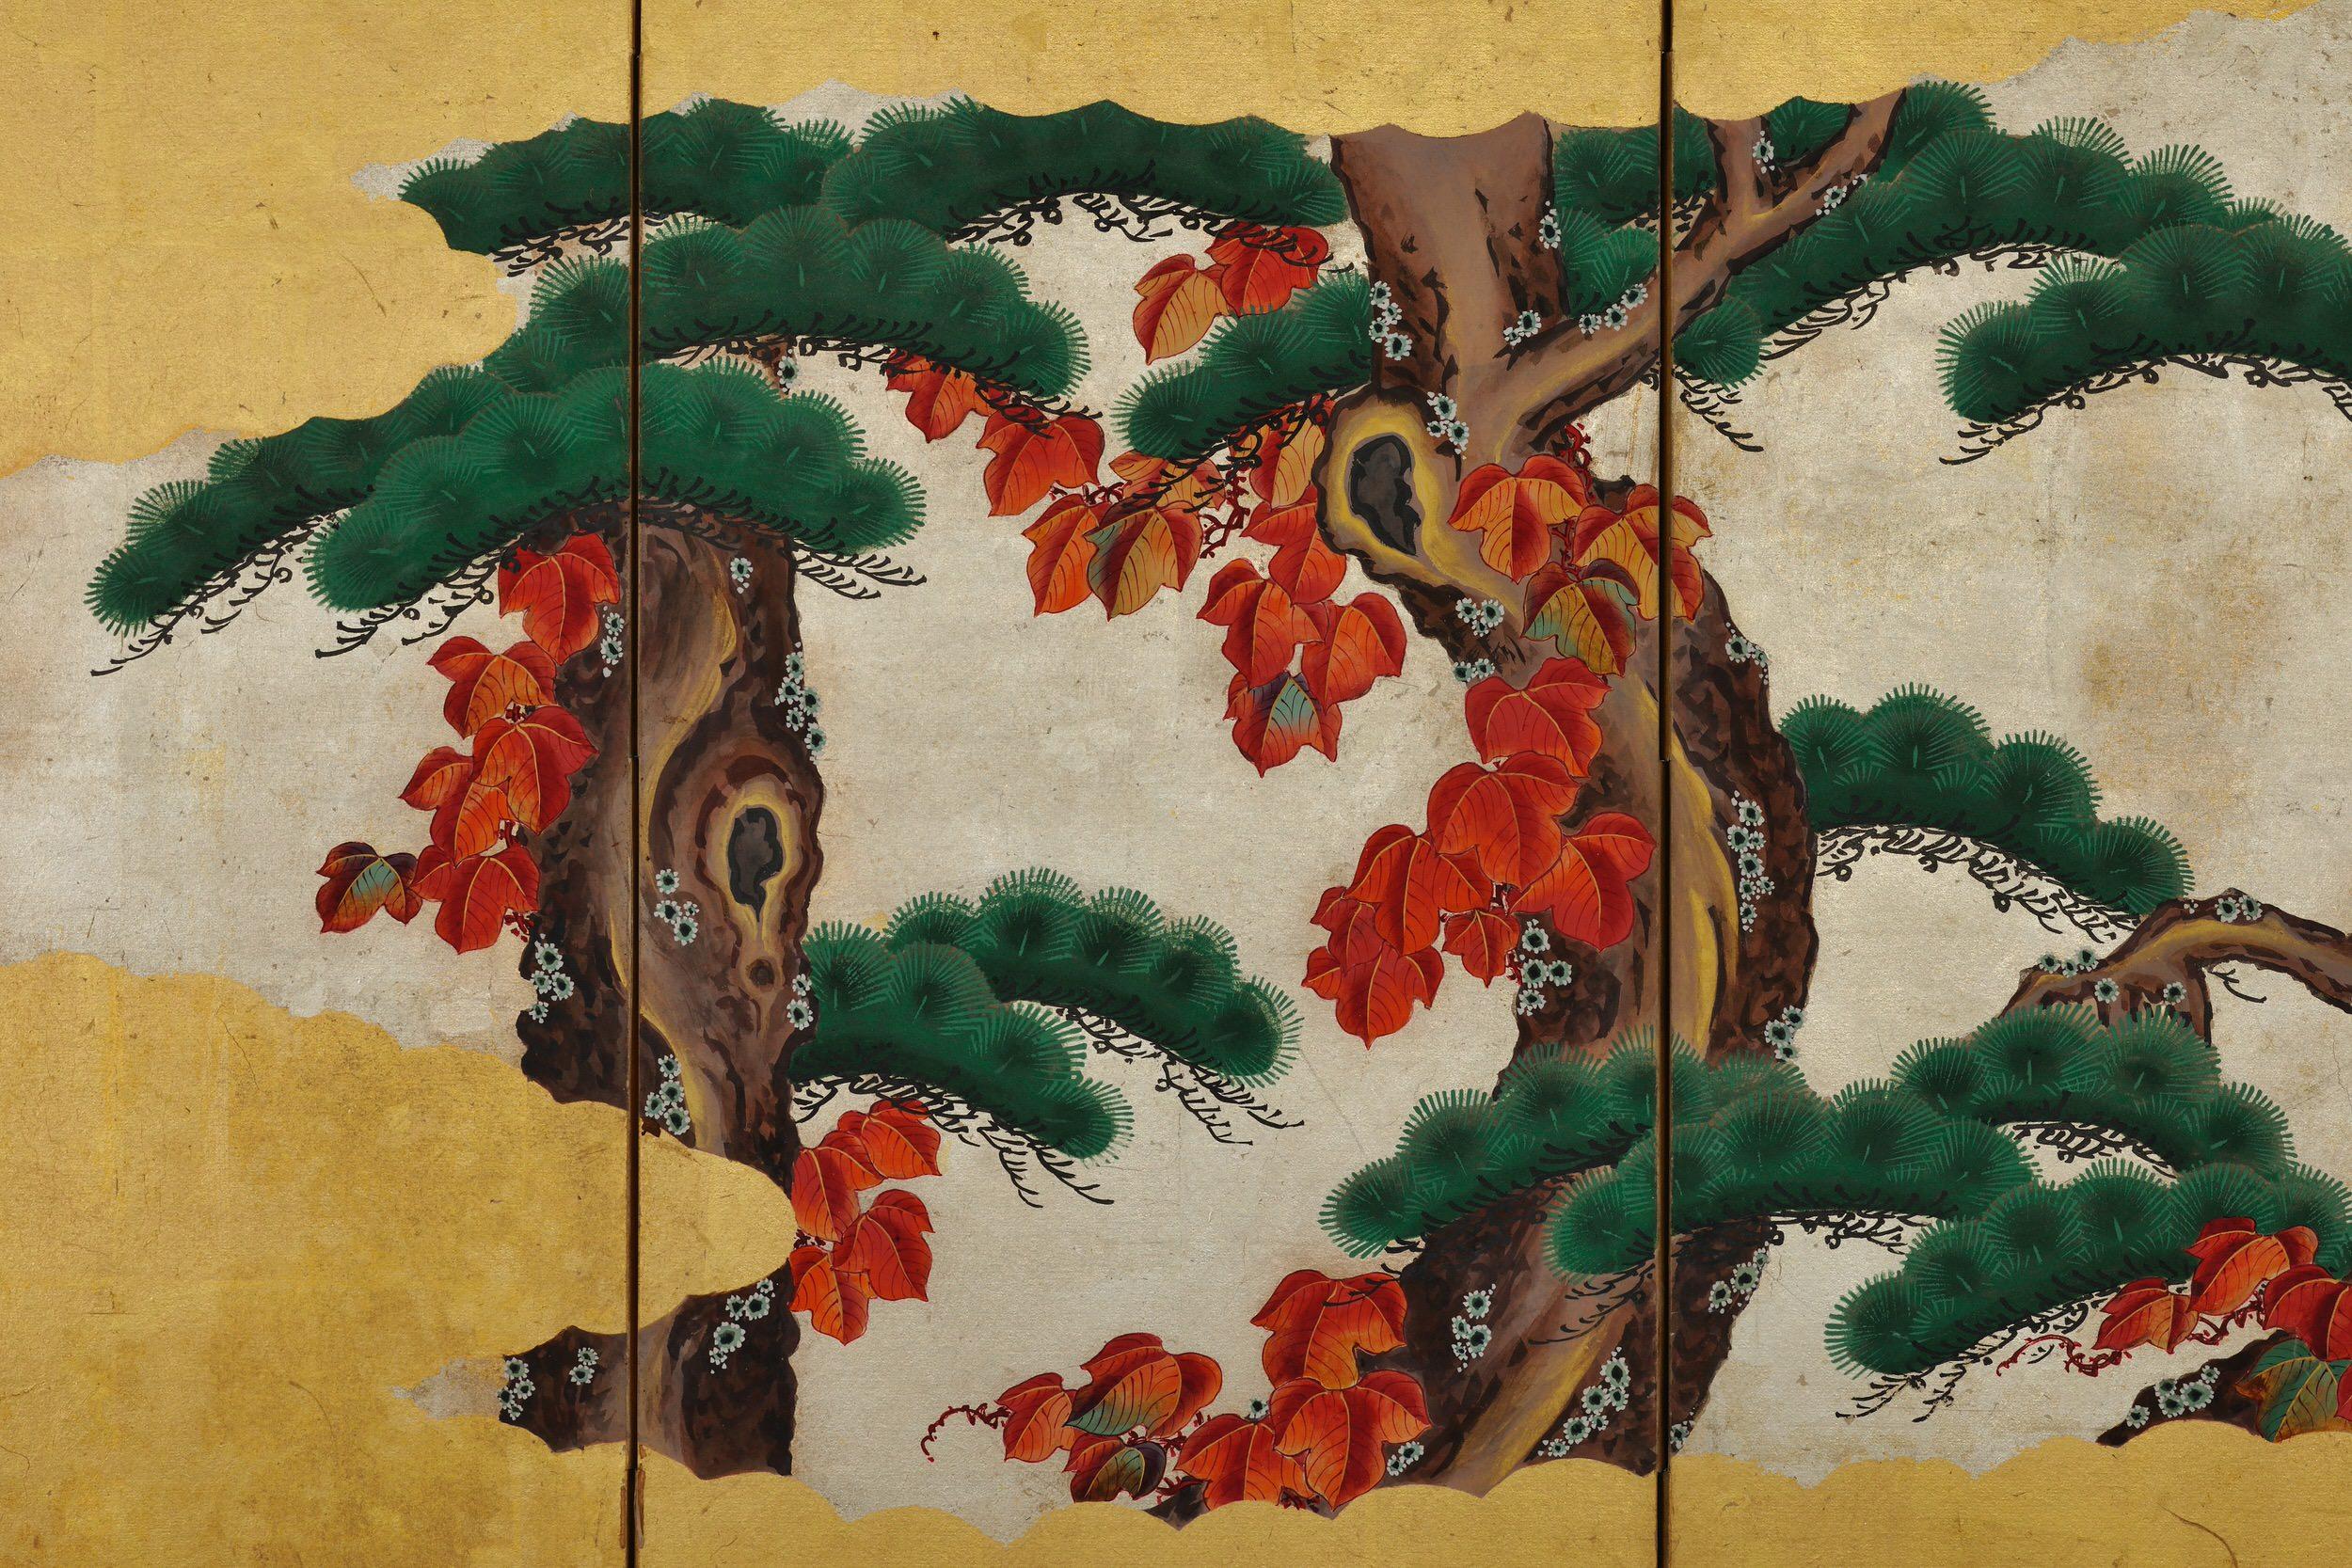 Hand-Painted 19th Century Small Japanese Screen Pair, Pine Trees and Vines on Gold Leaf